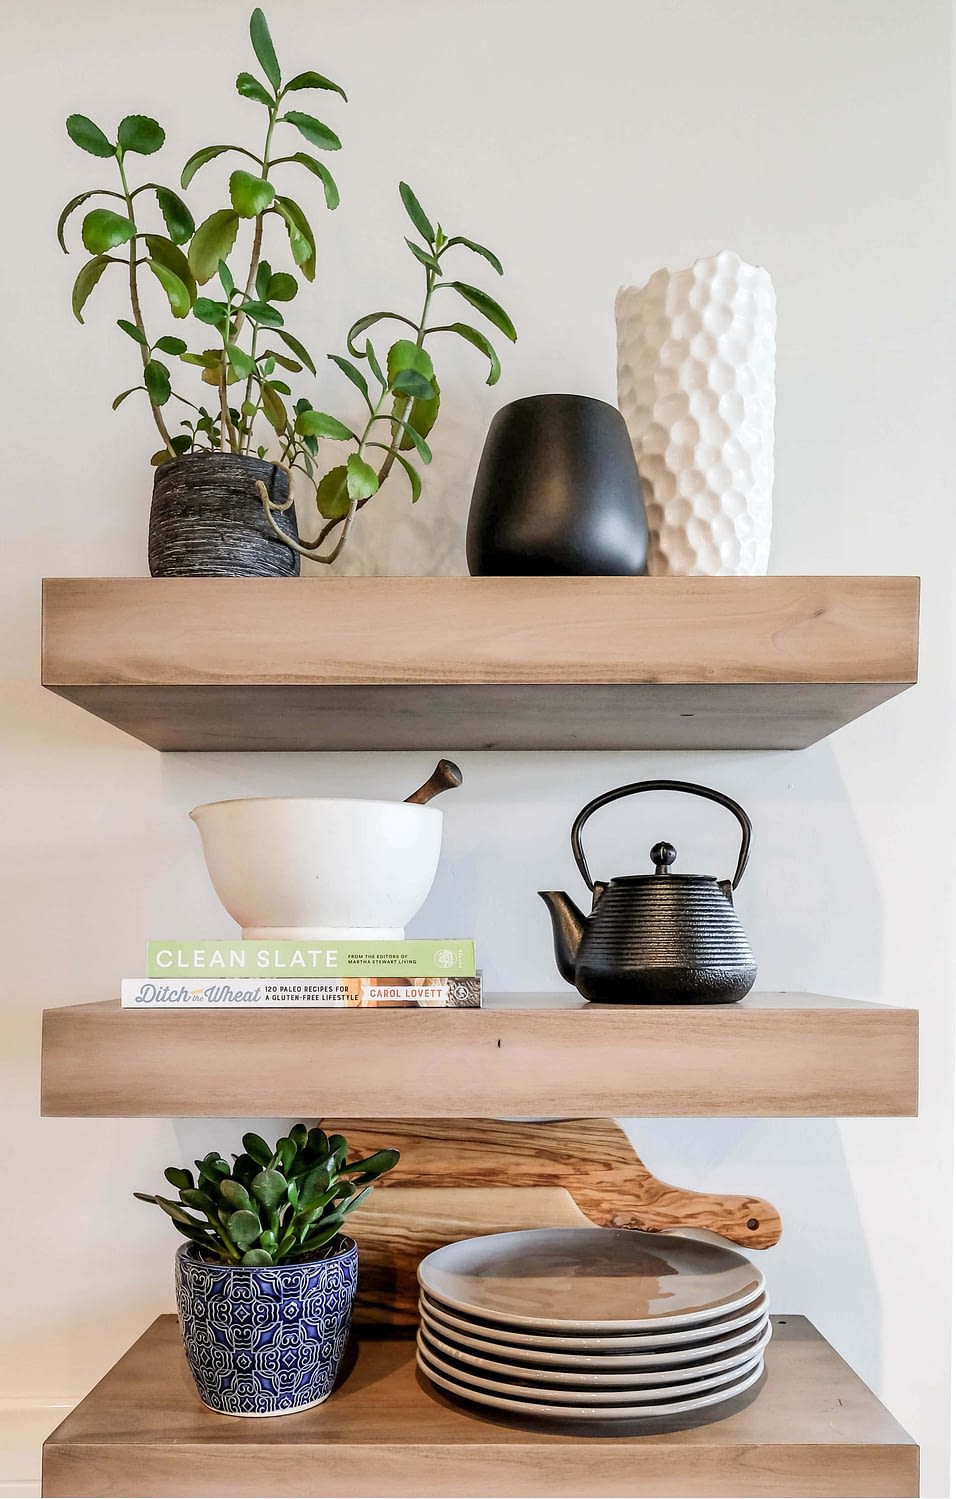 kitchen shelves styled with potted greenery, plates, a kettle, and books